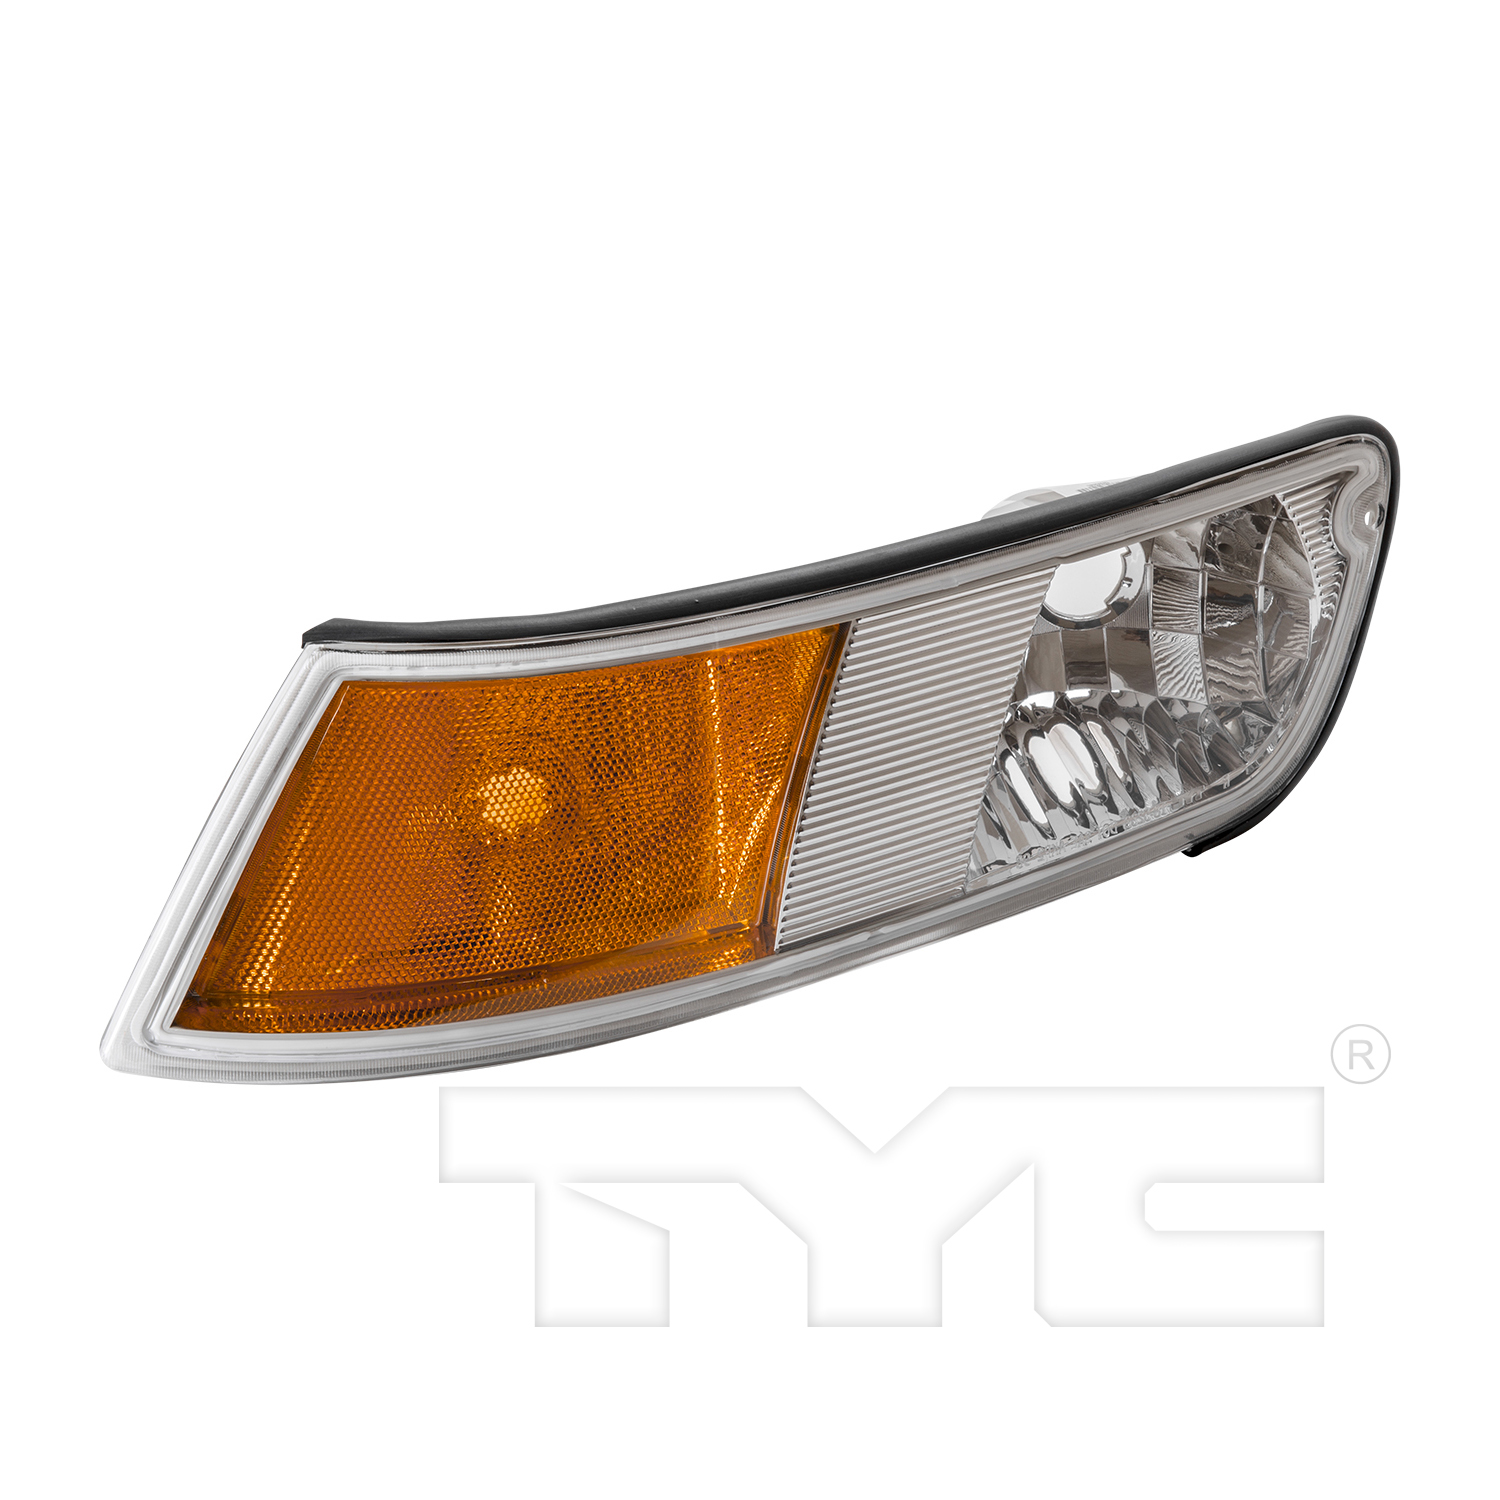 Aftermarket LAMPS for MERCURY - GRAND MARQUIS, GRAND MARQUIS,98-02,LT Front marker lamp assy